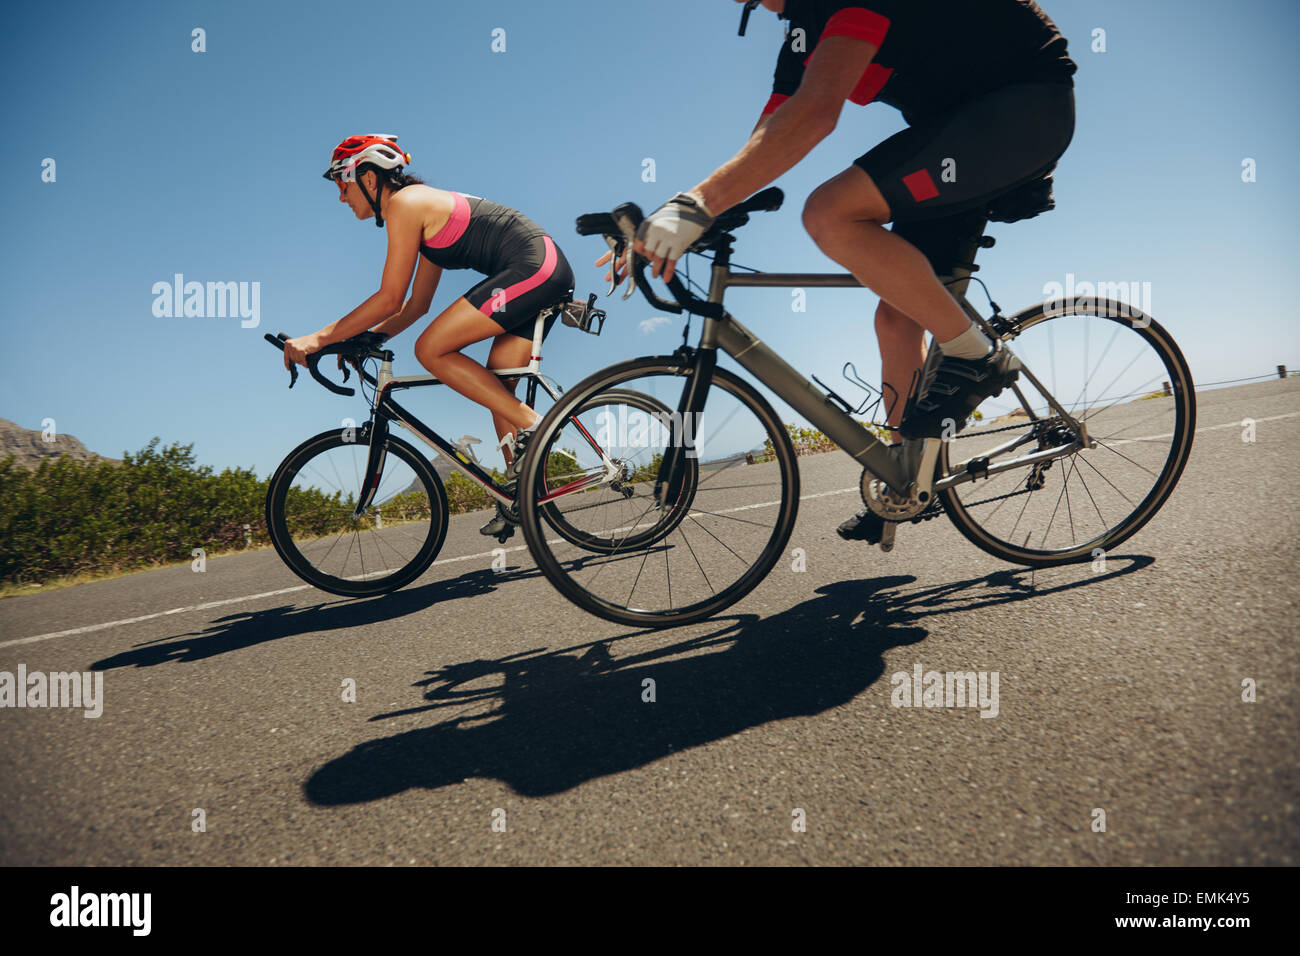 Action shot of a racing cyclists. Cyclist riding bicycles down hill on country road. Practicing for competition. Stock Photo